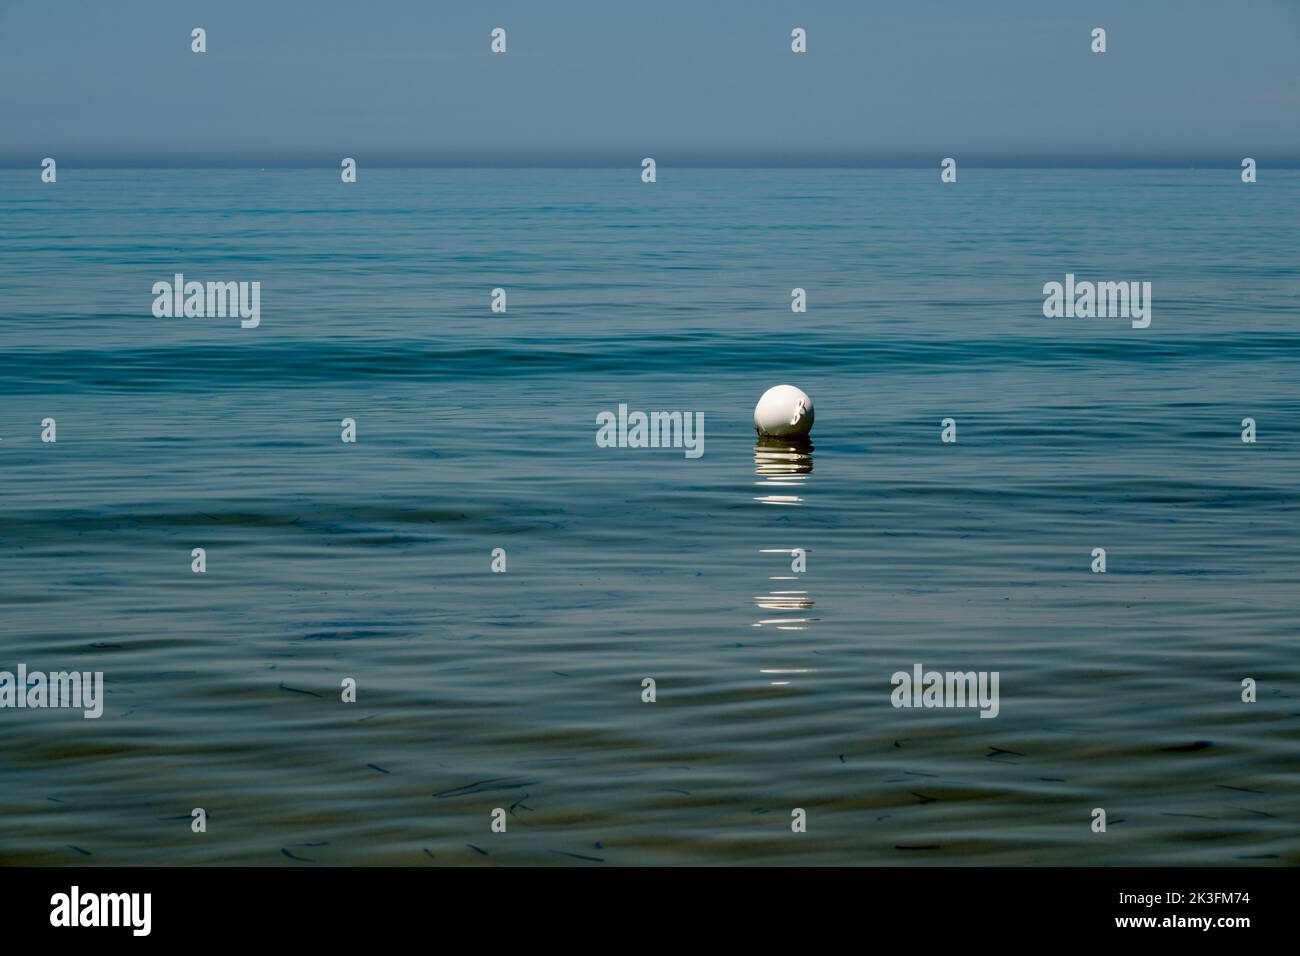 Minimalist image of a white buoy floating on the sea, seemingly isolated, with the horizon line dividing sky and sea in the background. Sicily summer. Stock Photo